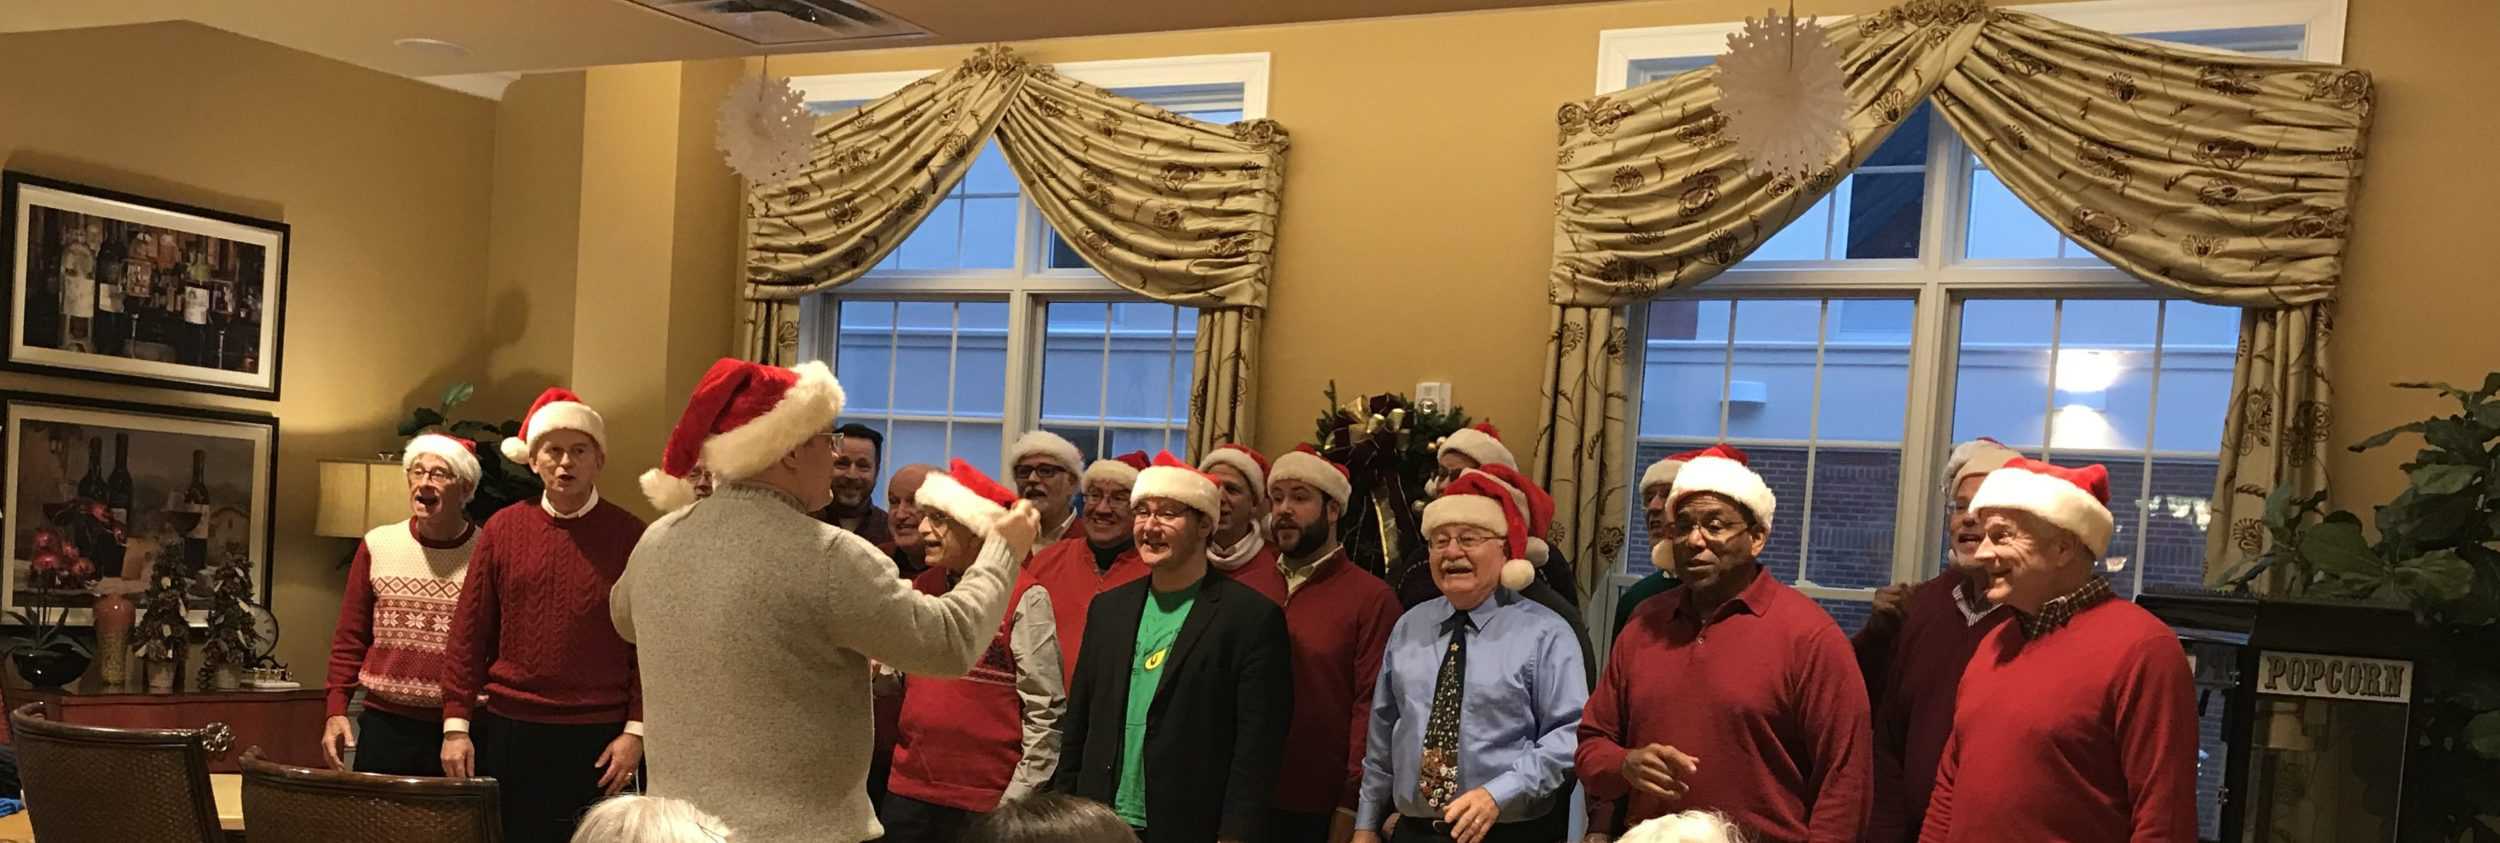 Alexandria Harmonizers visit The Kensington Falls Church assisted living for a holiday performance